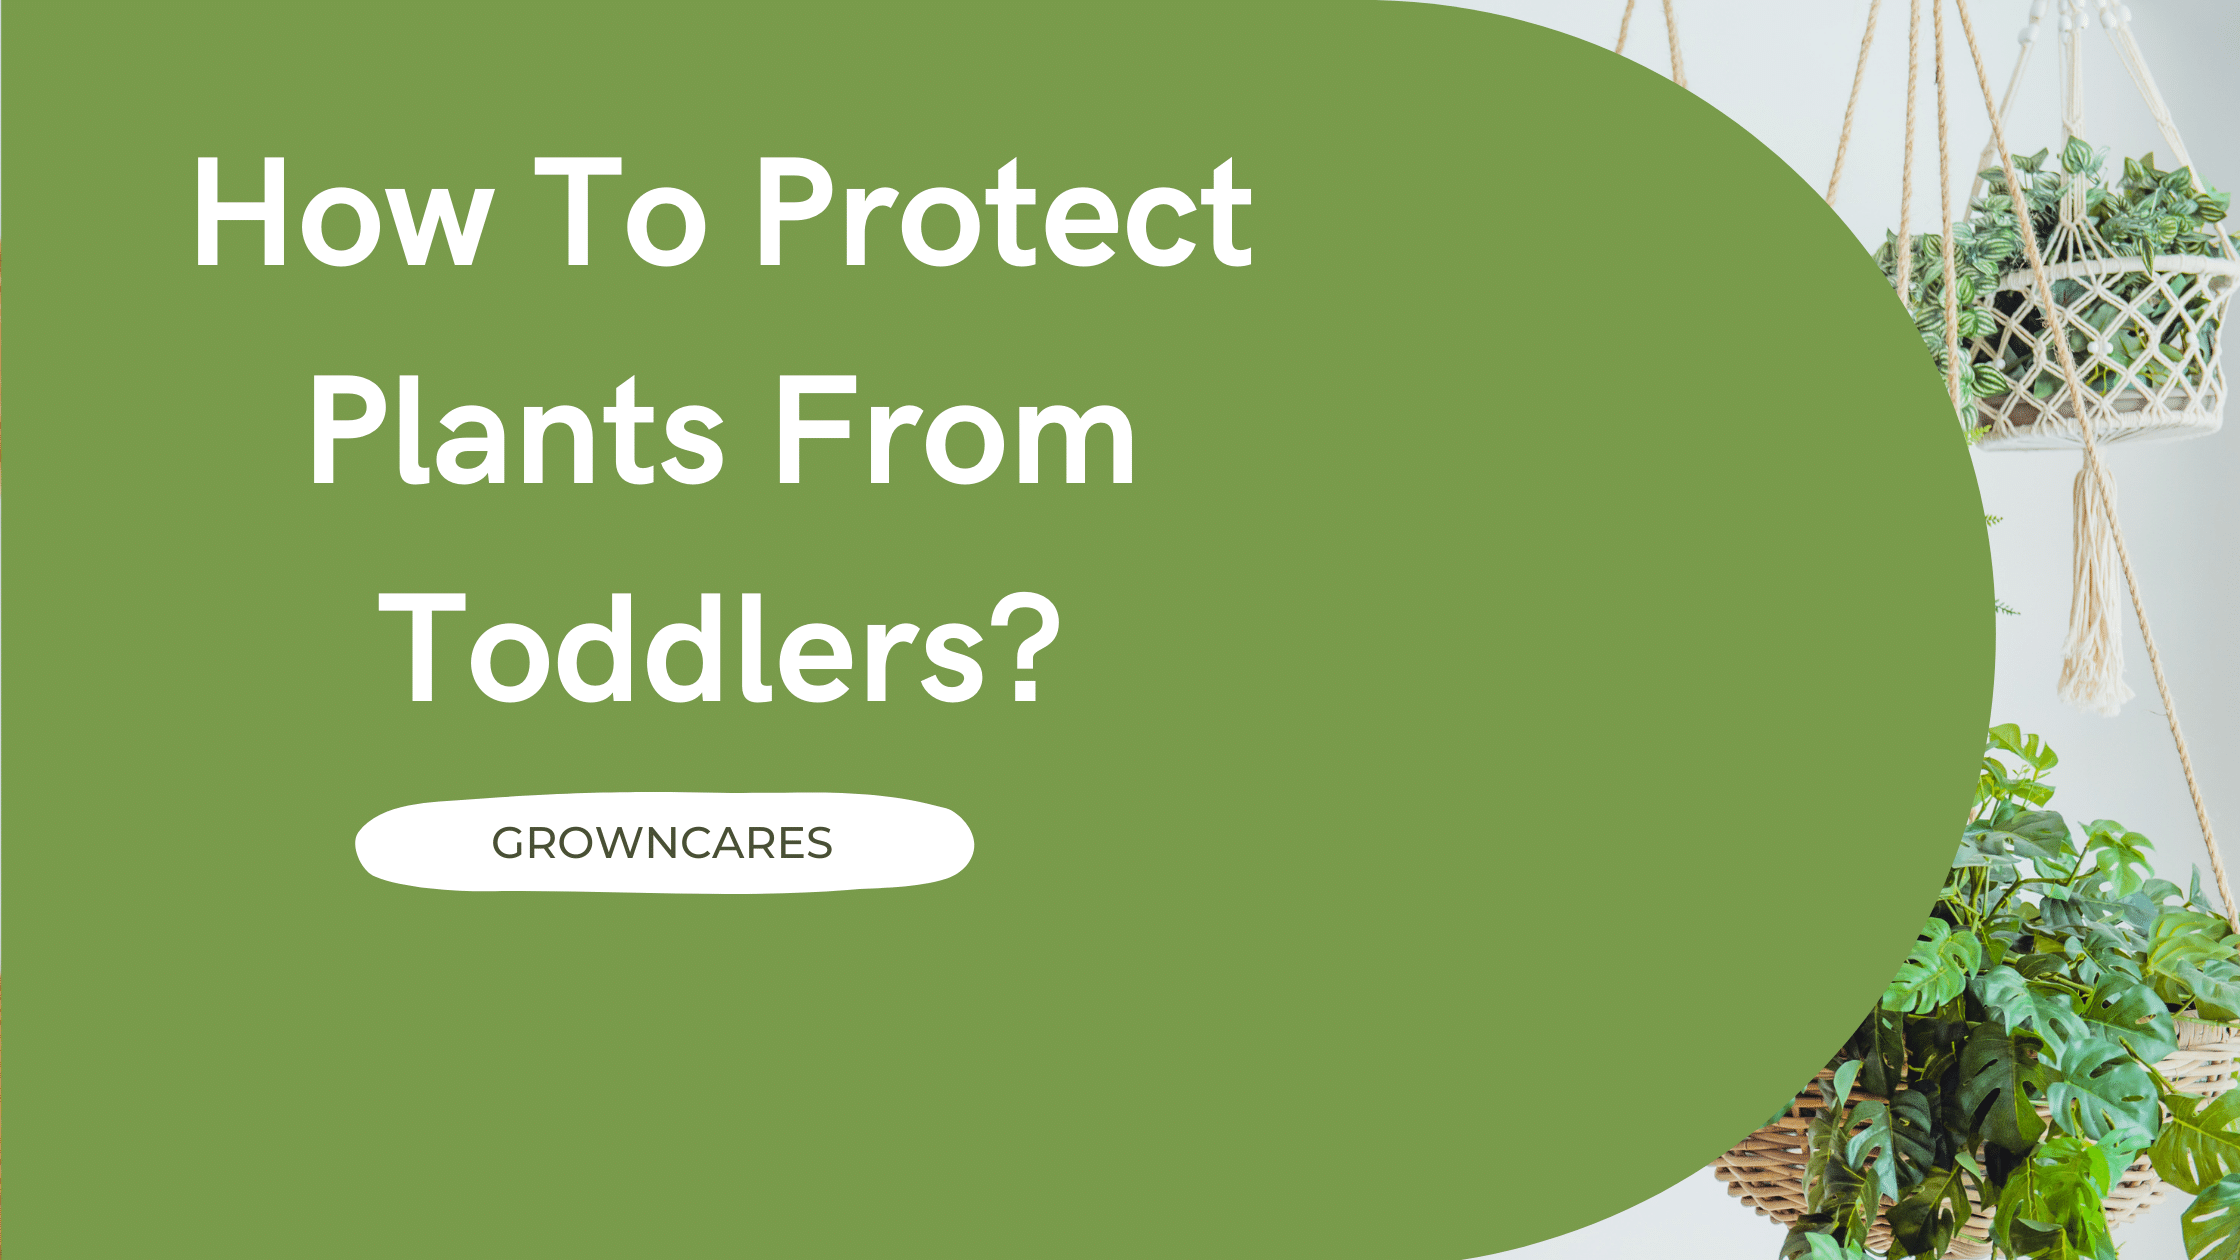 How To Protect Plants From Toddlers?